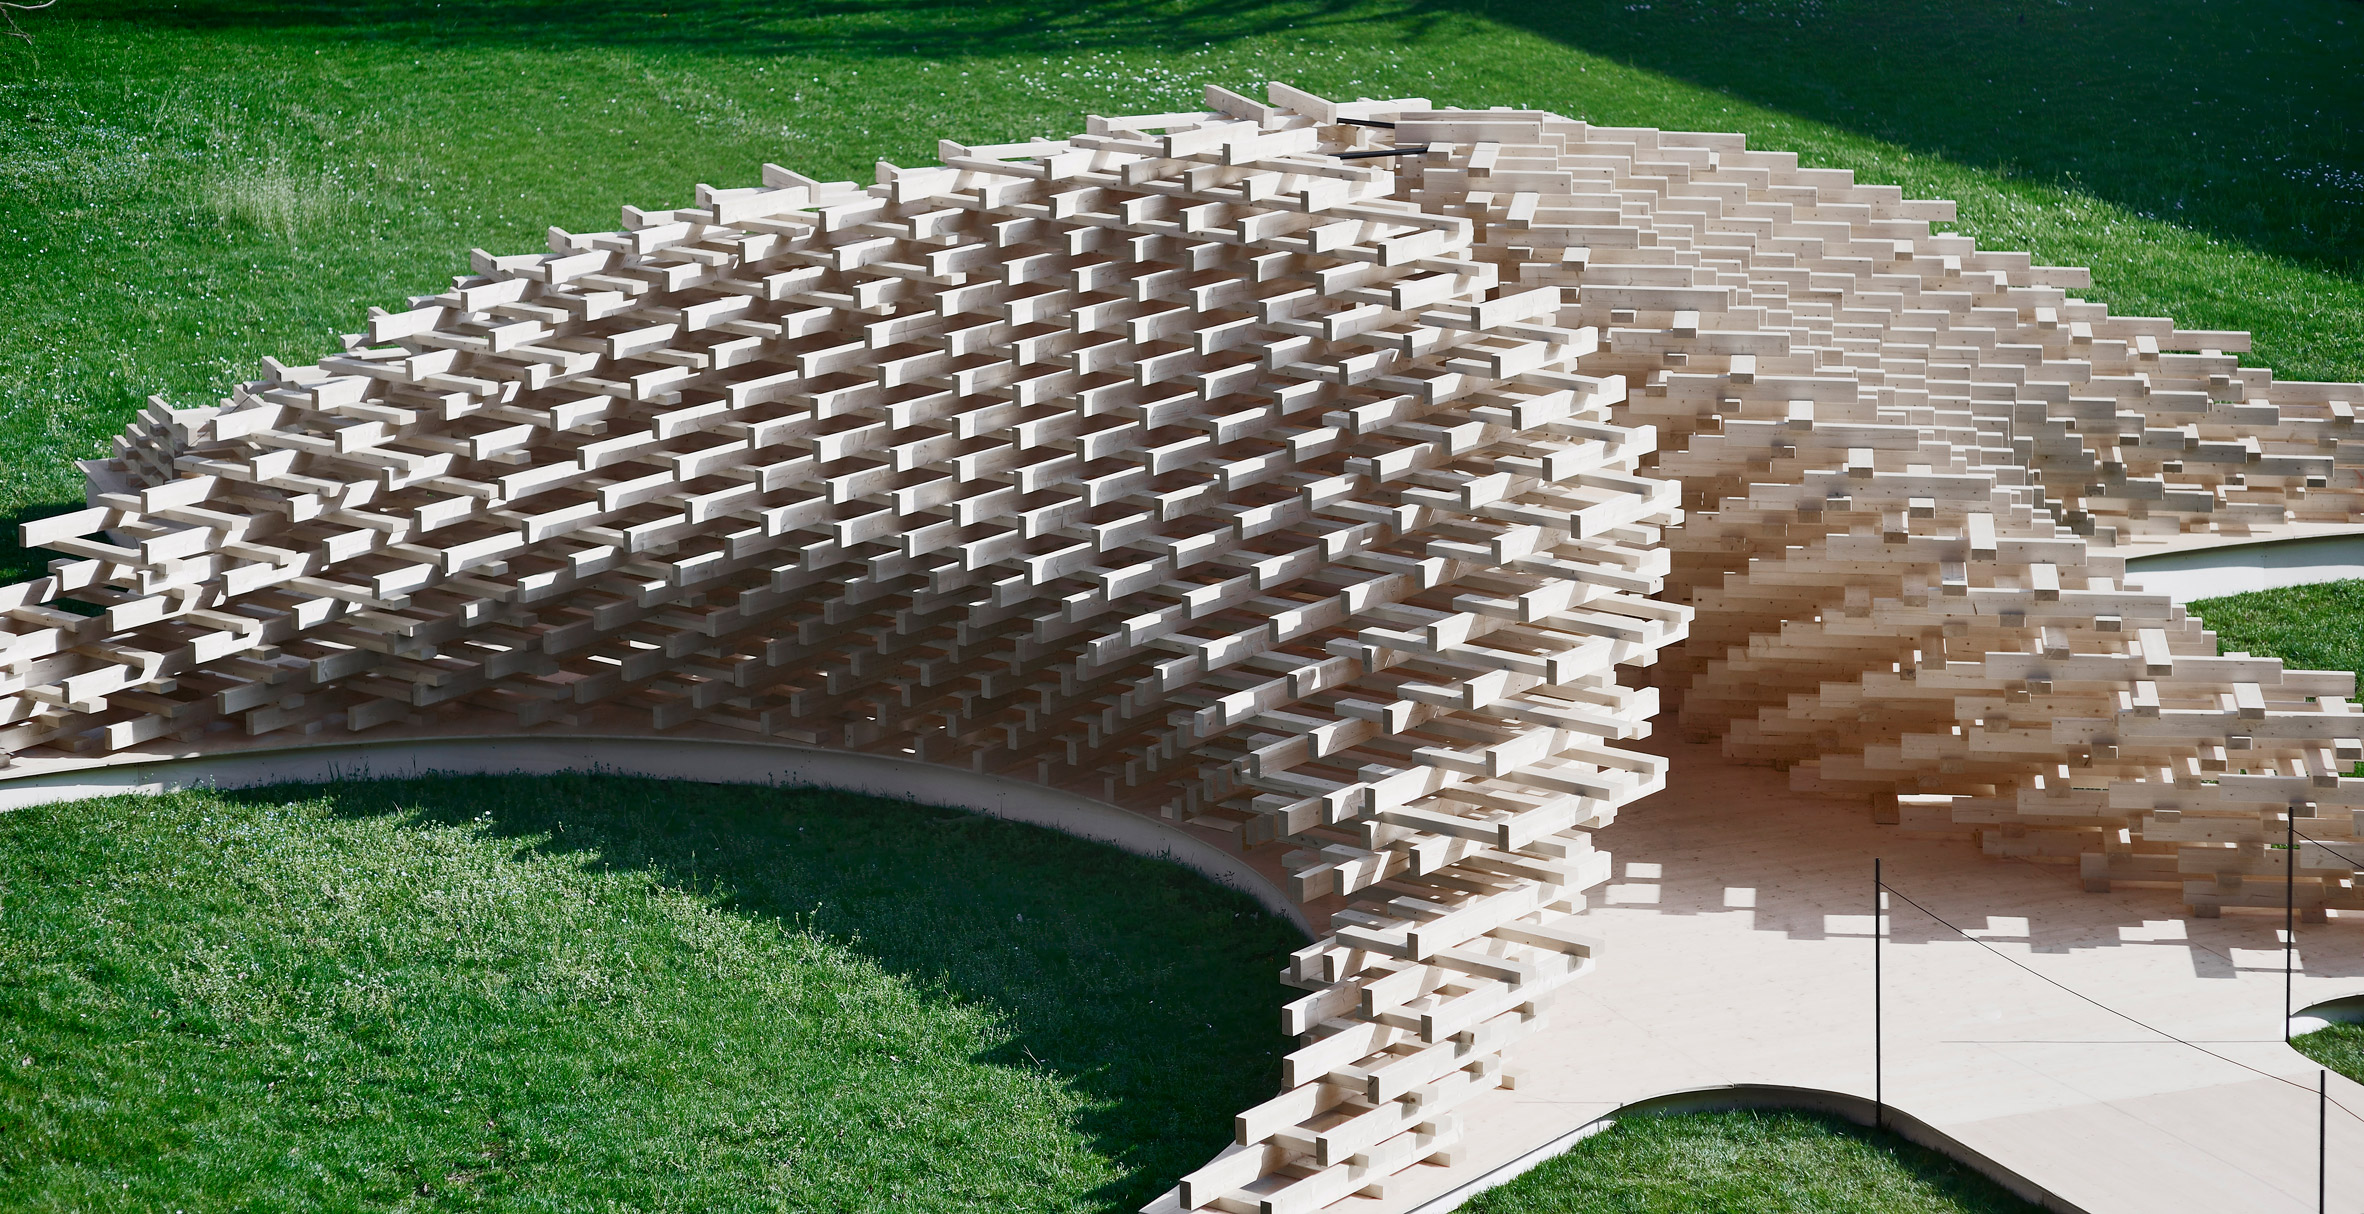 Peter Pichler builds pyramidal pavilion using 1,600 wooden beams